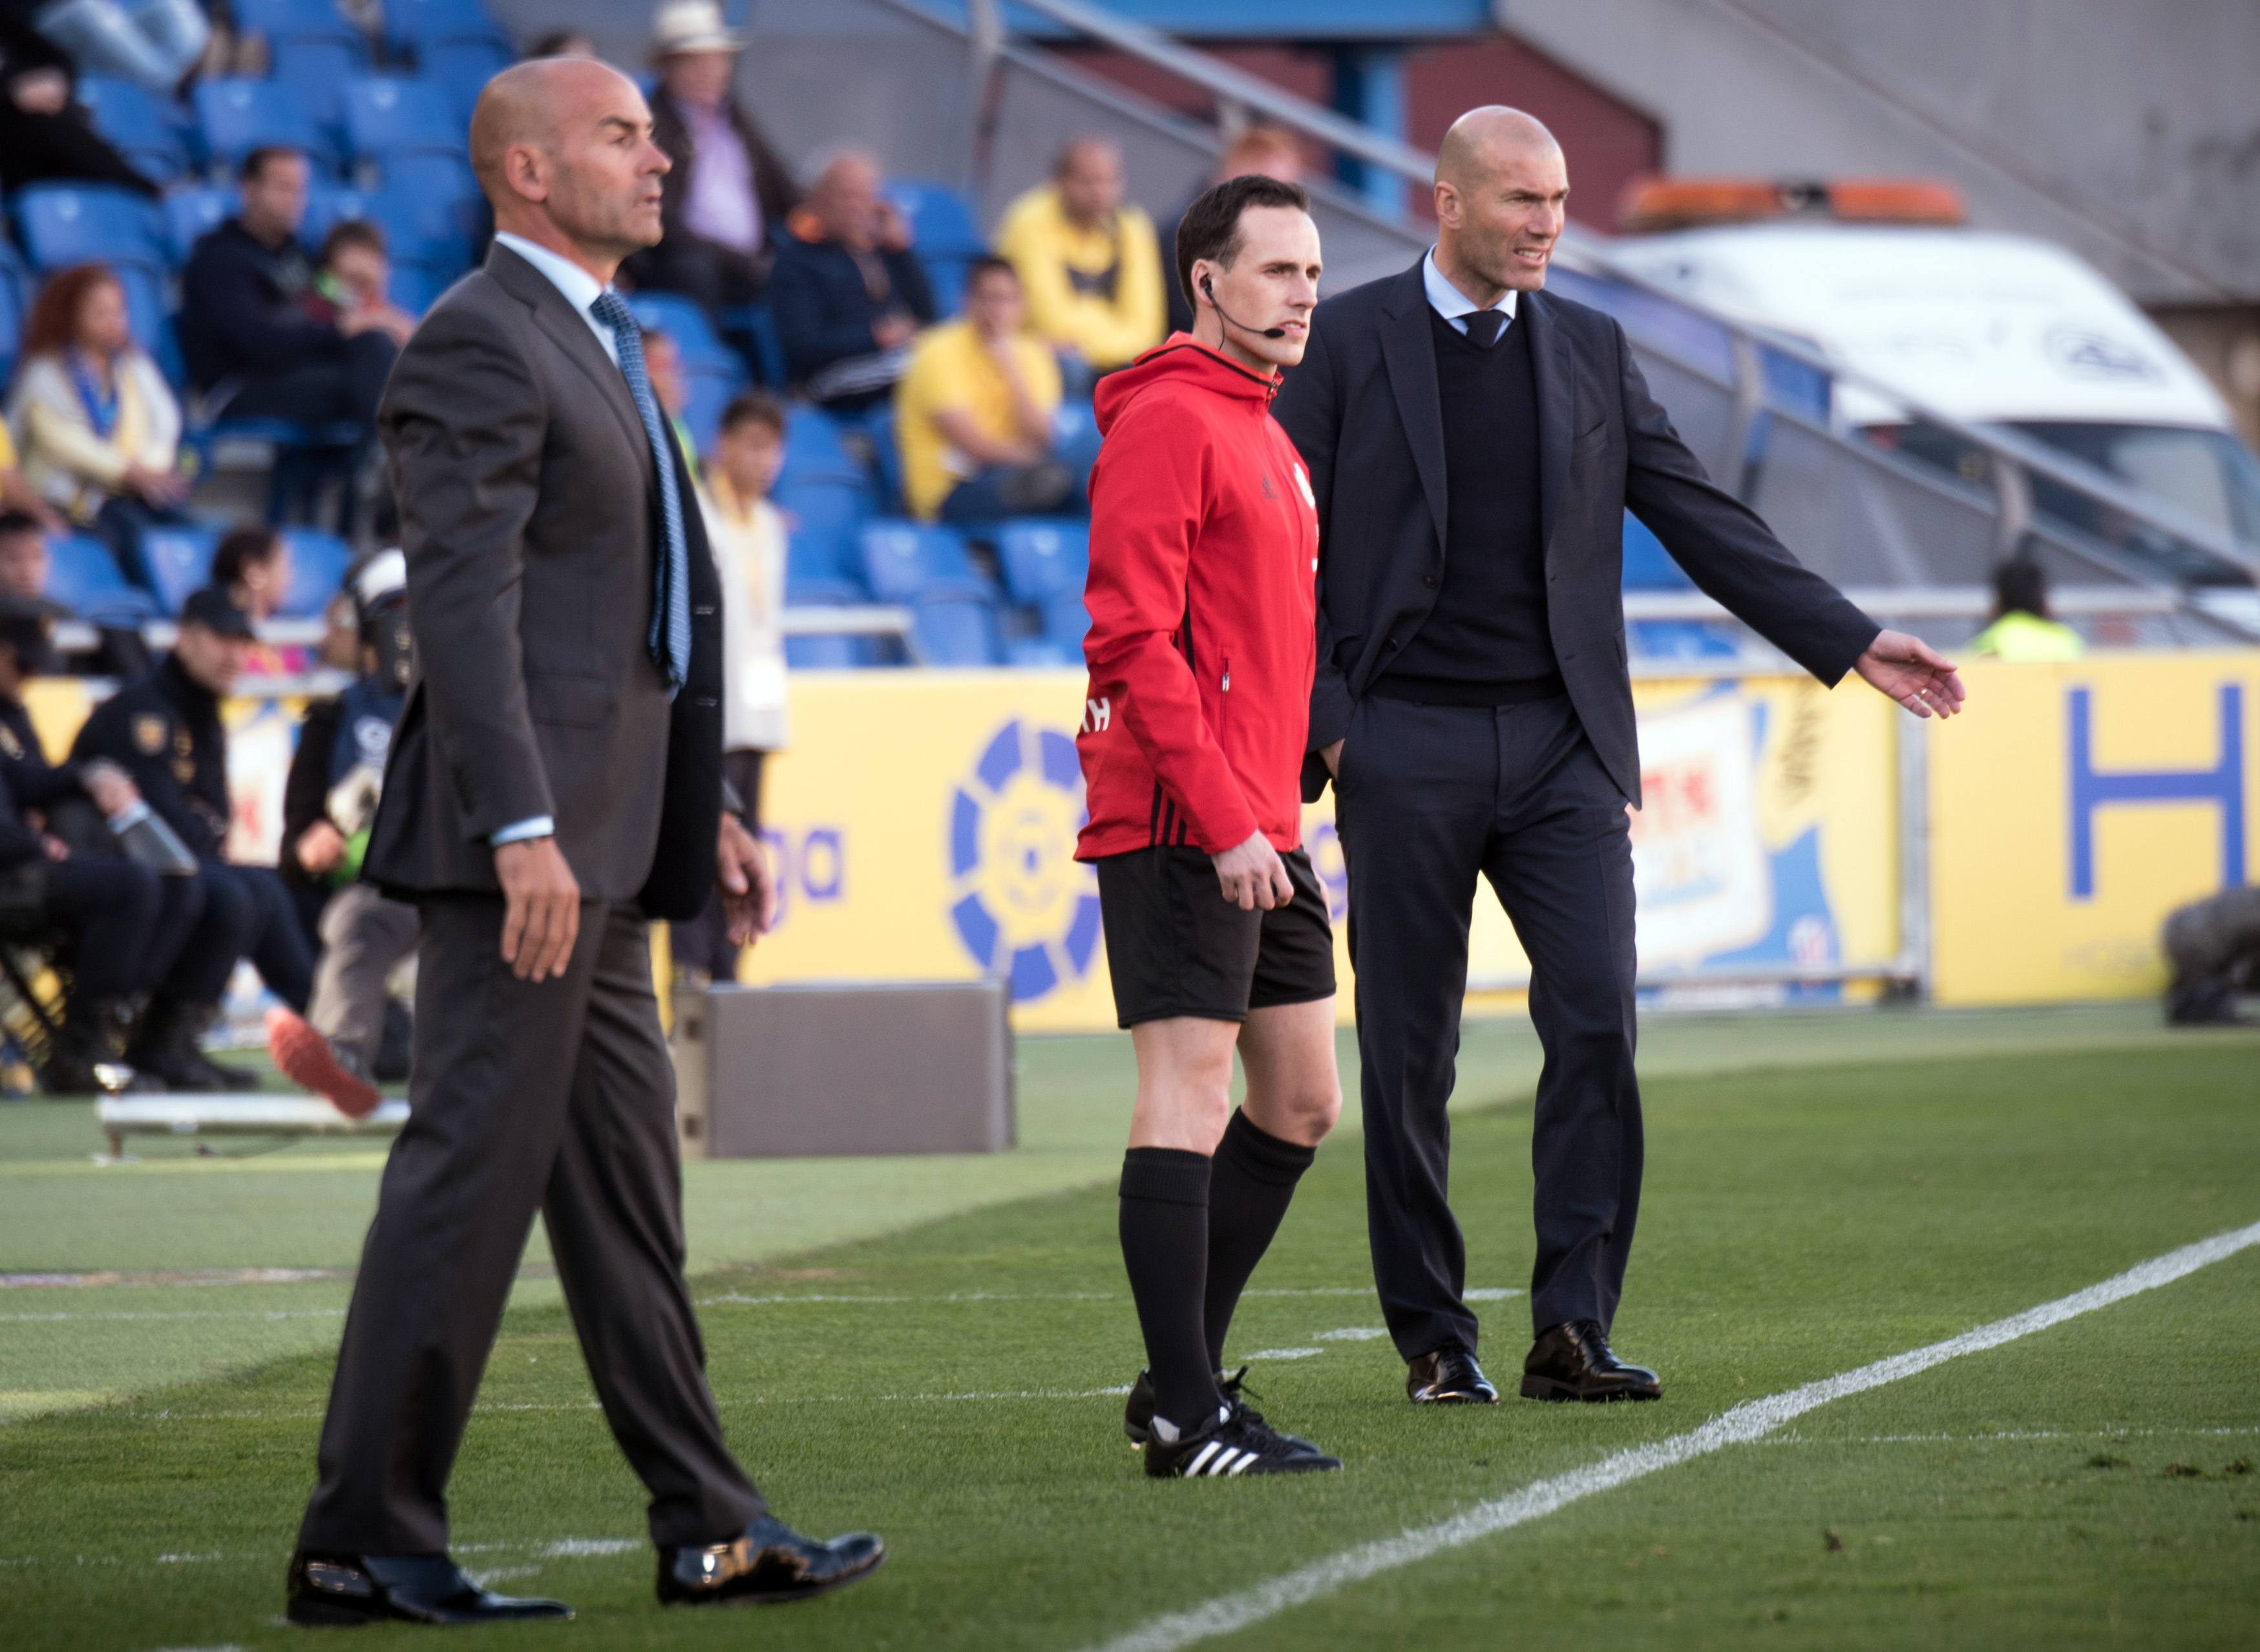 Las Palmas' coach Paco Jemez (L) and Real Madrid's French coach Zinedine Zidane (R) stand on the sideline during the Spanish League football match between UD Las Palmas and Real Madrid CF at the Gran Canaria stadium in Las Palmas on March 31, 2018. / AFP PHOTO / DESIREE MARTIN        (Photo credit should read DESIREE MARTIN/AFP/Getty Images)